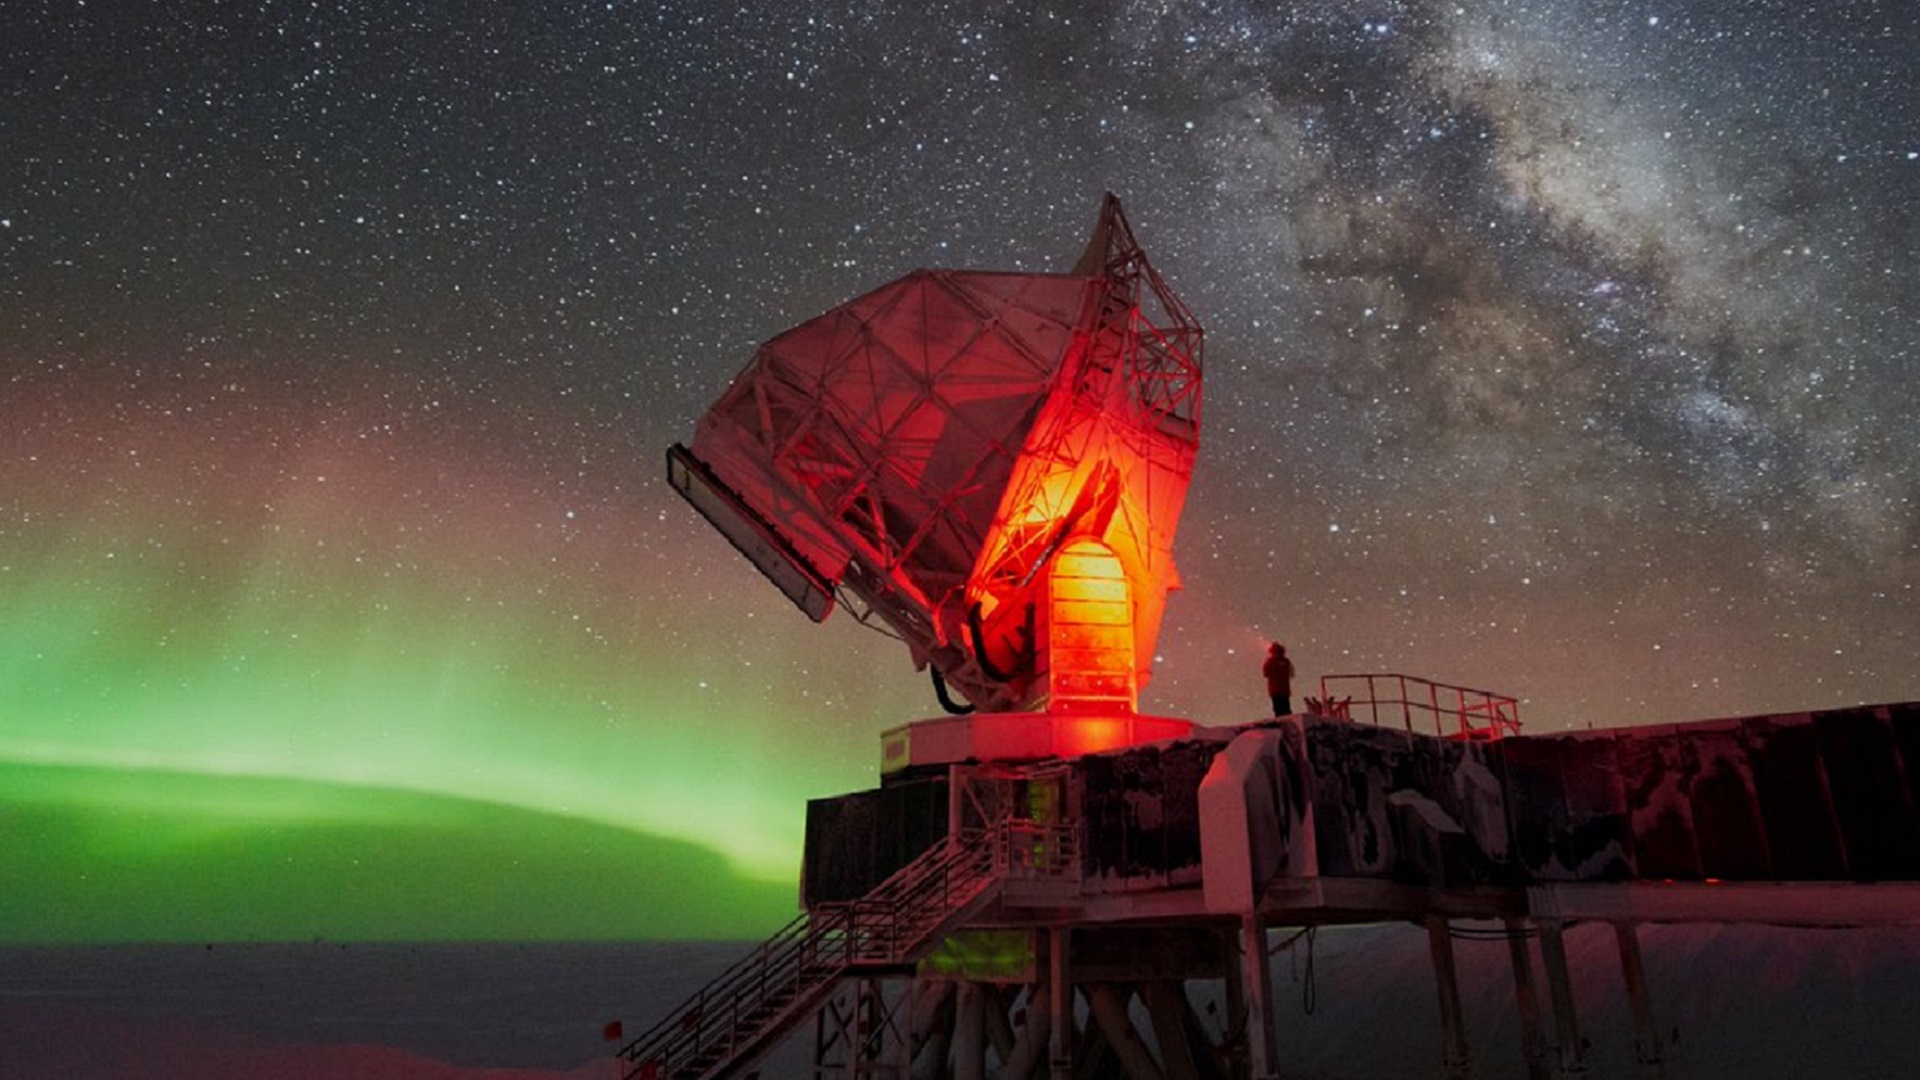 Antarctica is the perfect place for stargazing